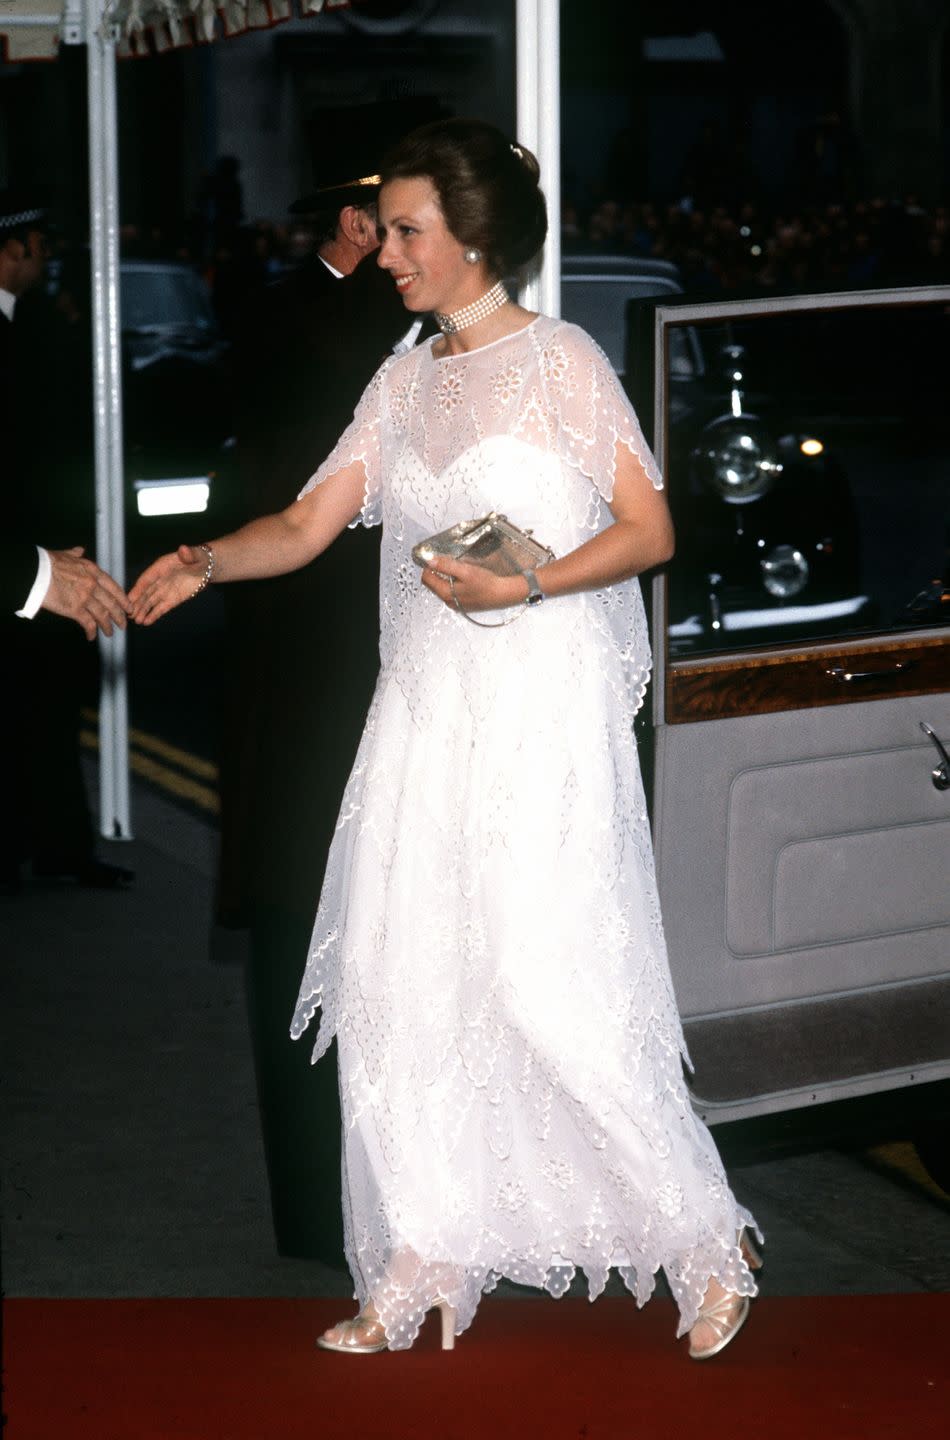 <p>The Princess Royal wore a white dress with an embroidered overlay to an event at the Royal Opera House in London. </p>